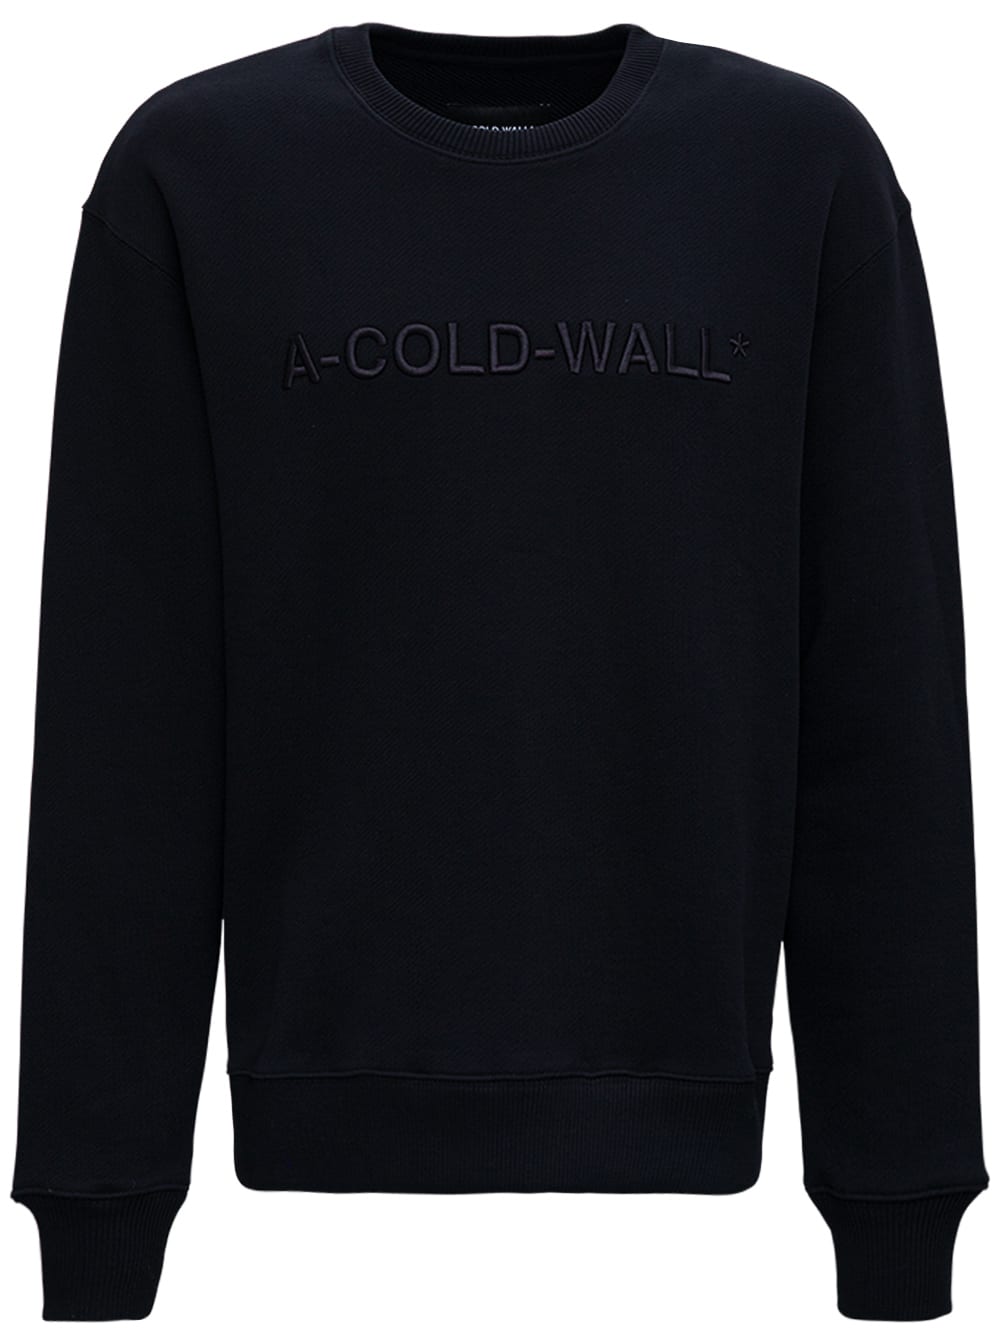 A-COLD-WALL Black Jersey Sweatshirt With Logo